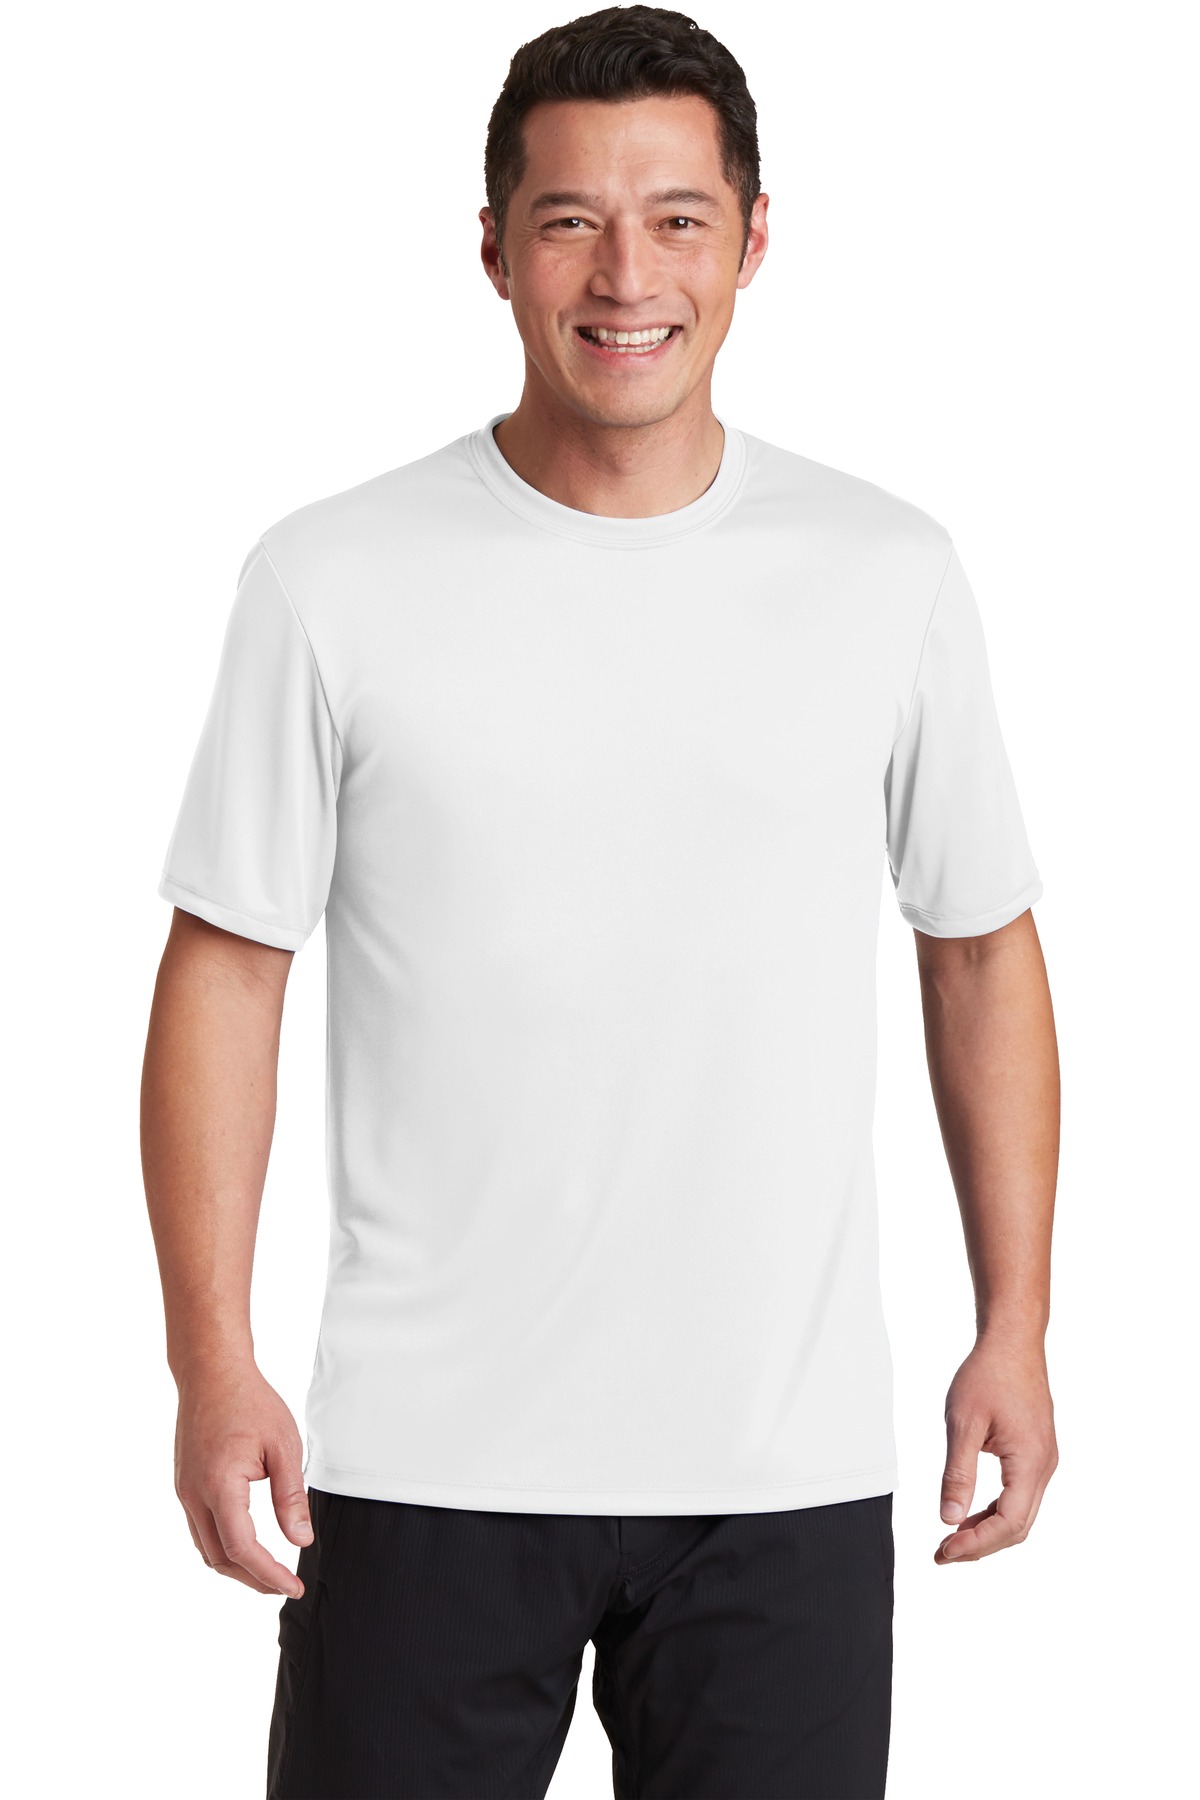 Hanes T-Shirts for Corporate Hospitality ® Cool Dri® Performance T-Shirt.-Hanes